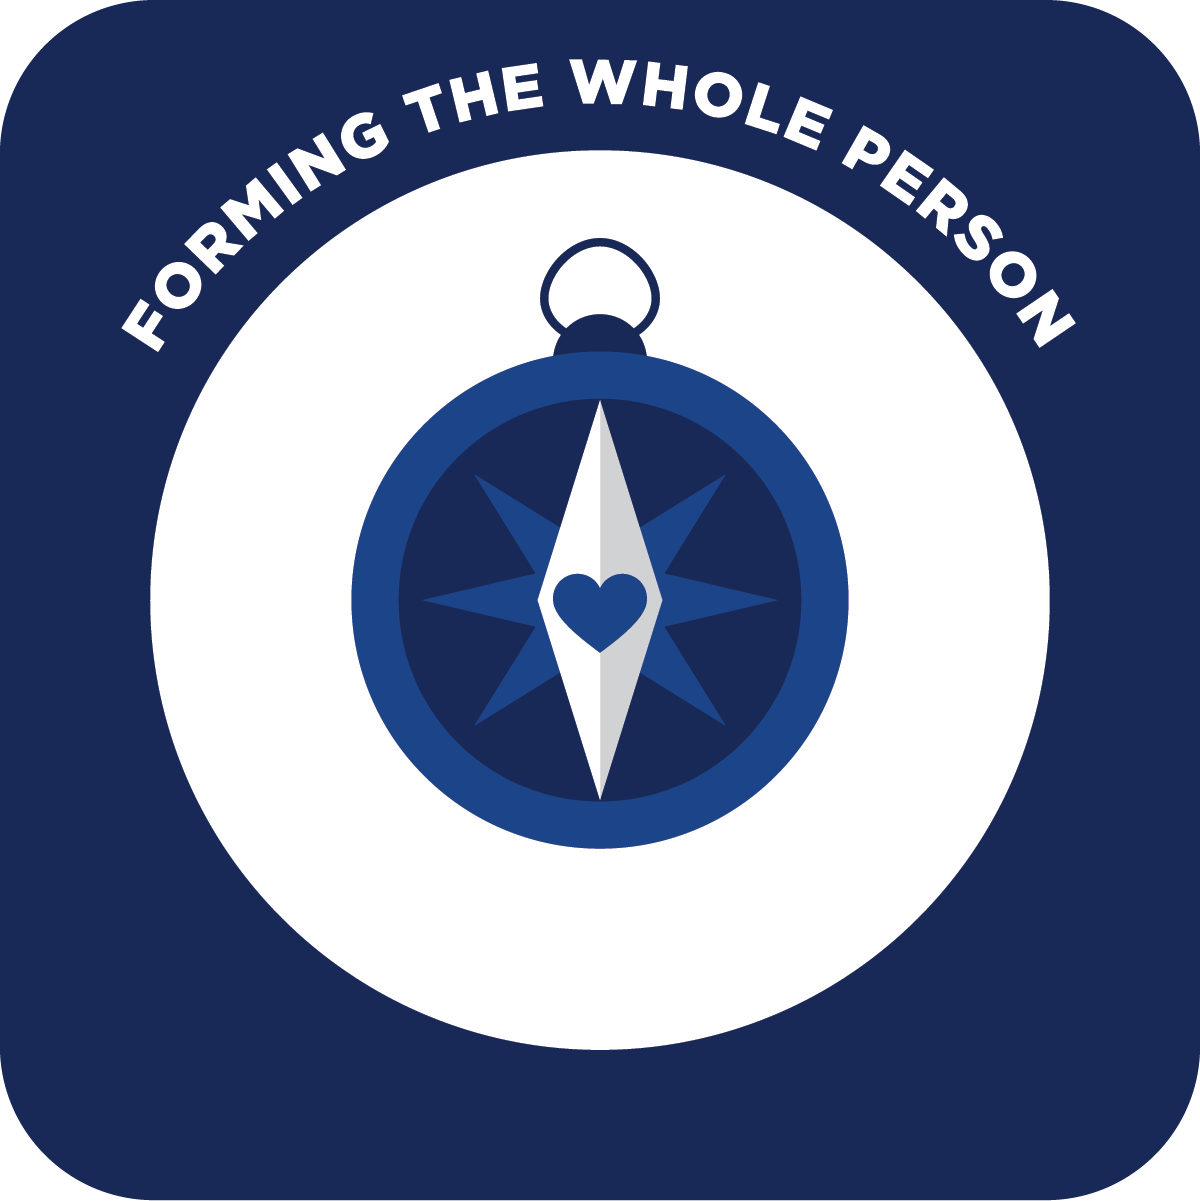 Forming the whole person icon